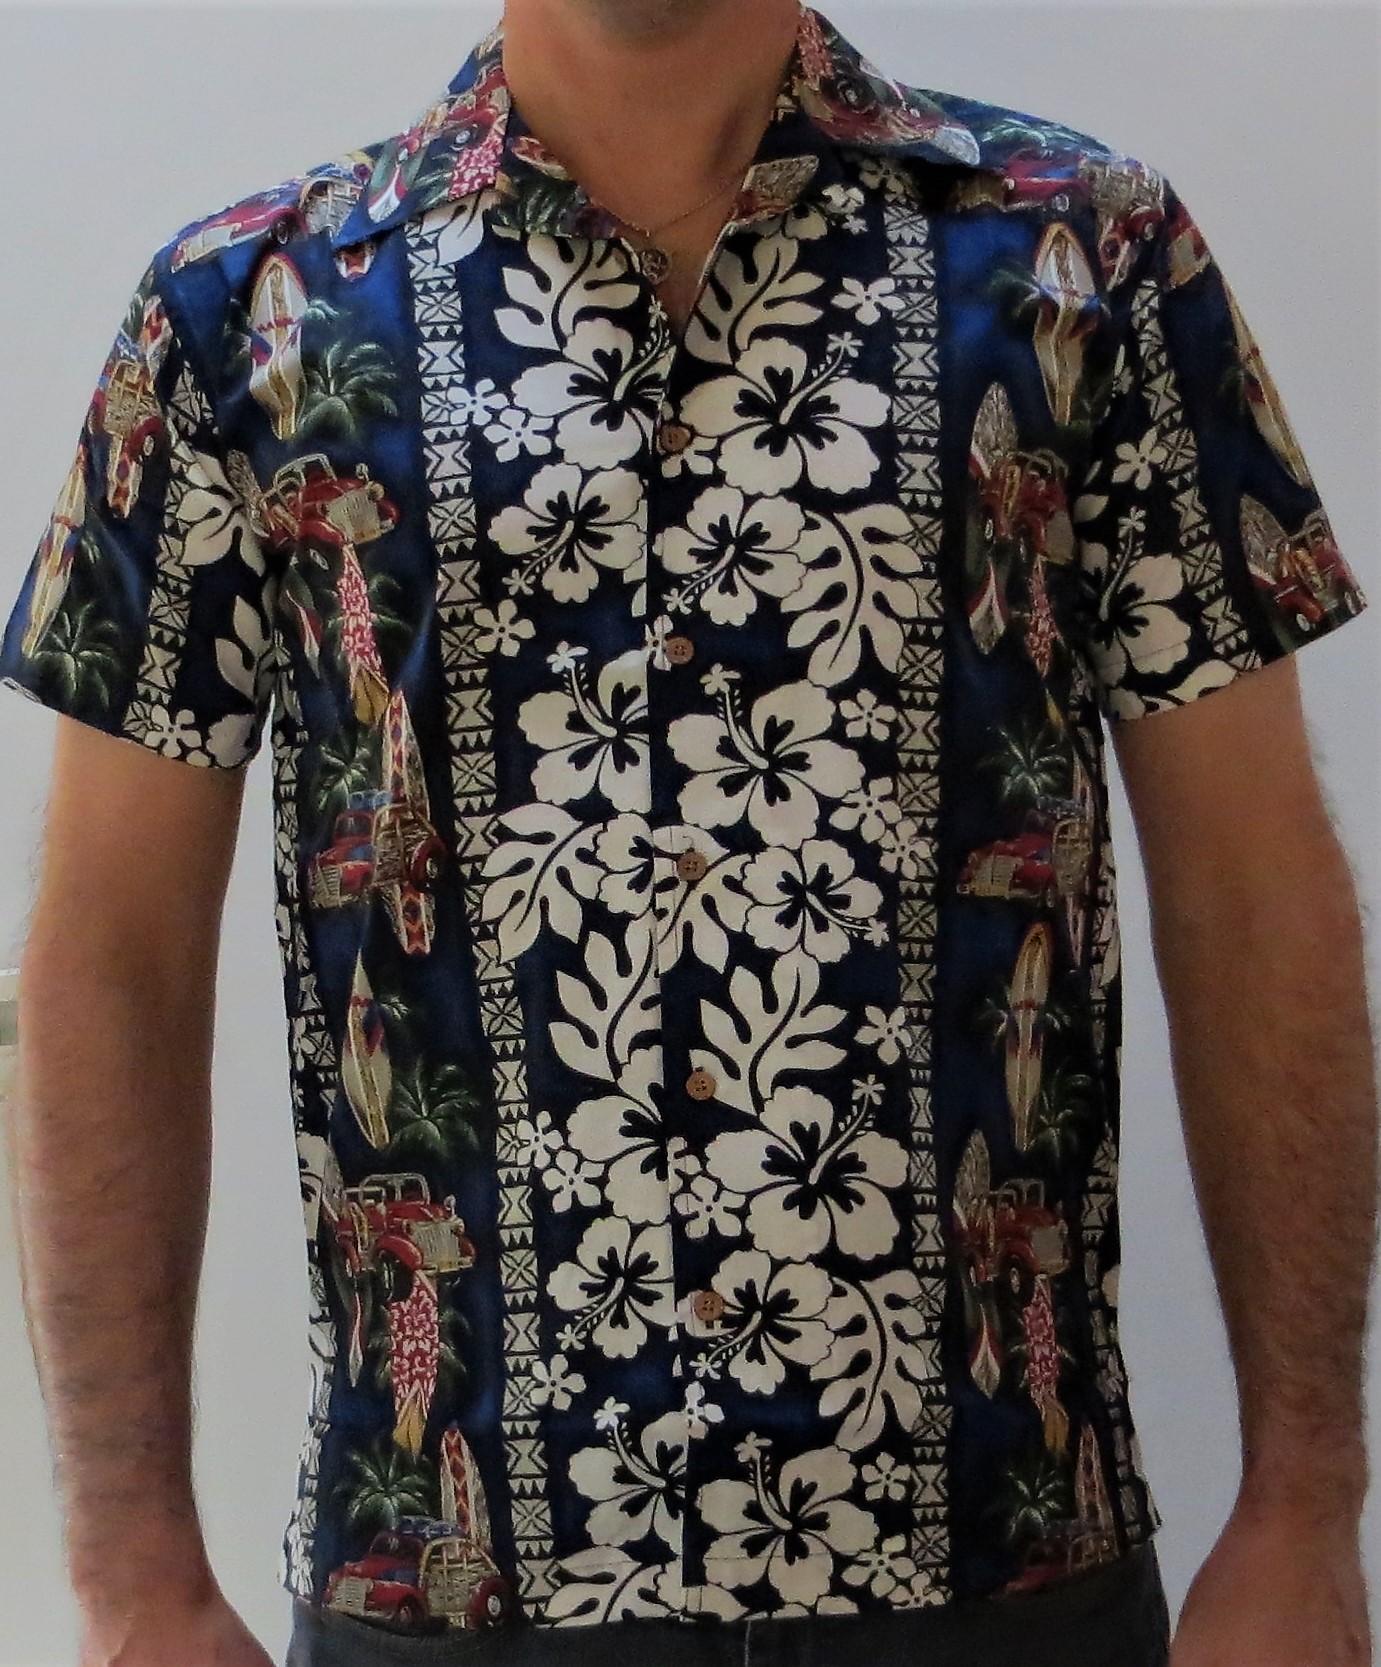 Relco Navy Blue Hawaiian Shirt With Flowers, Beach Buggies And Surf ...